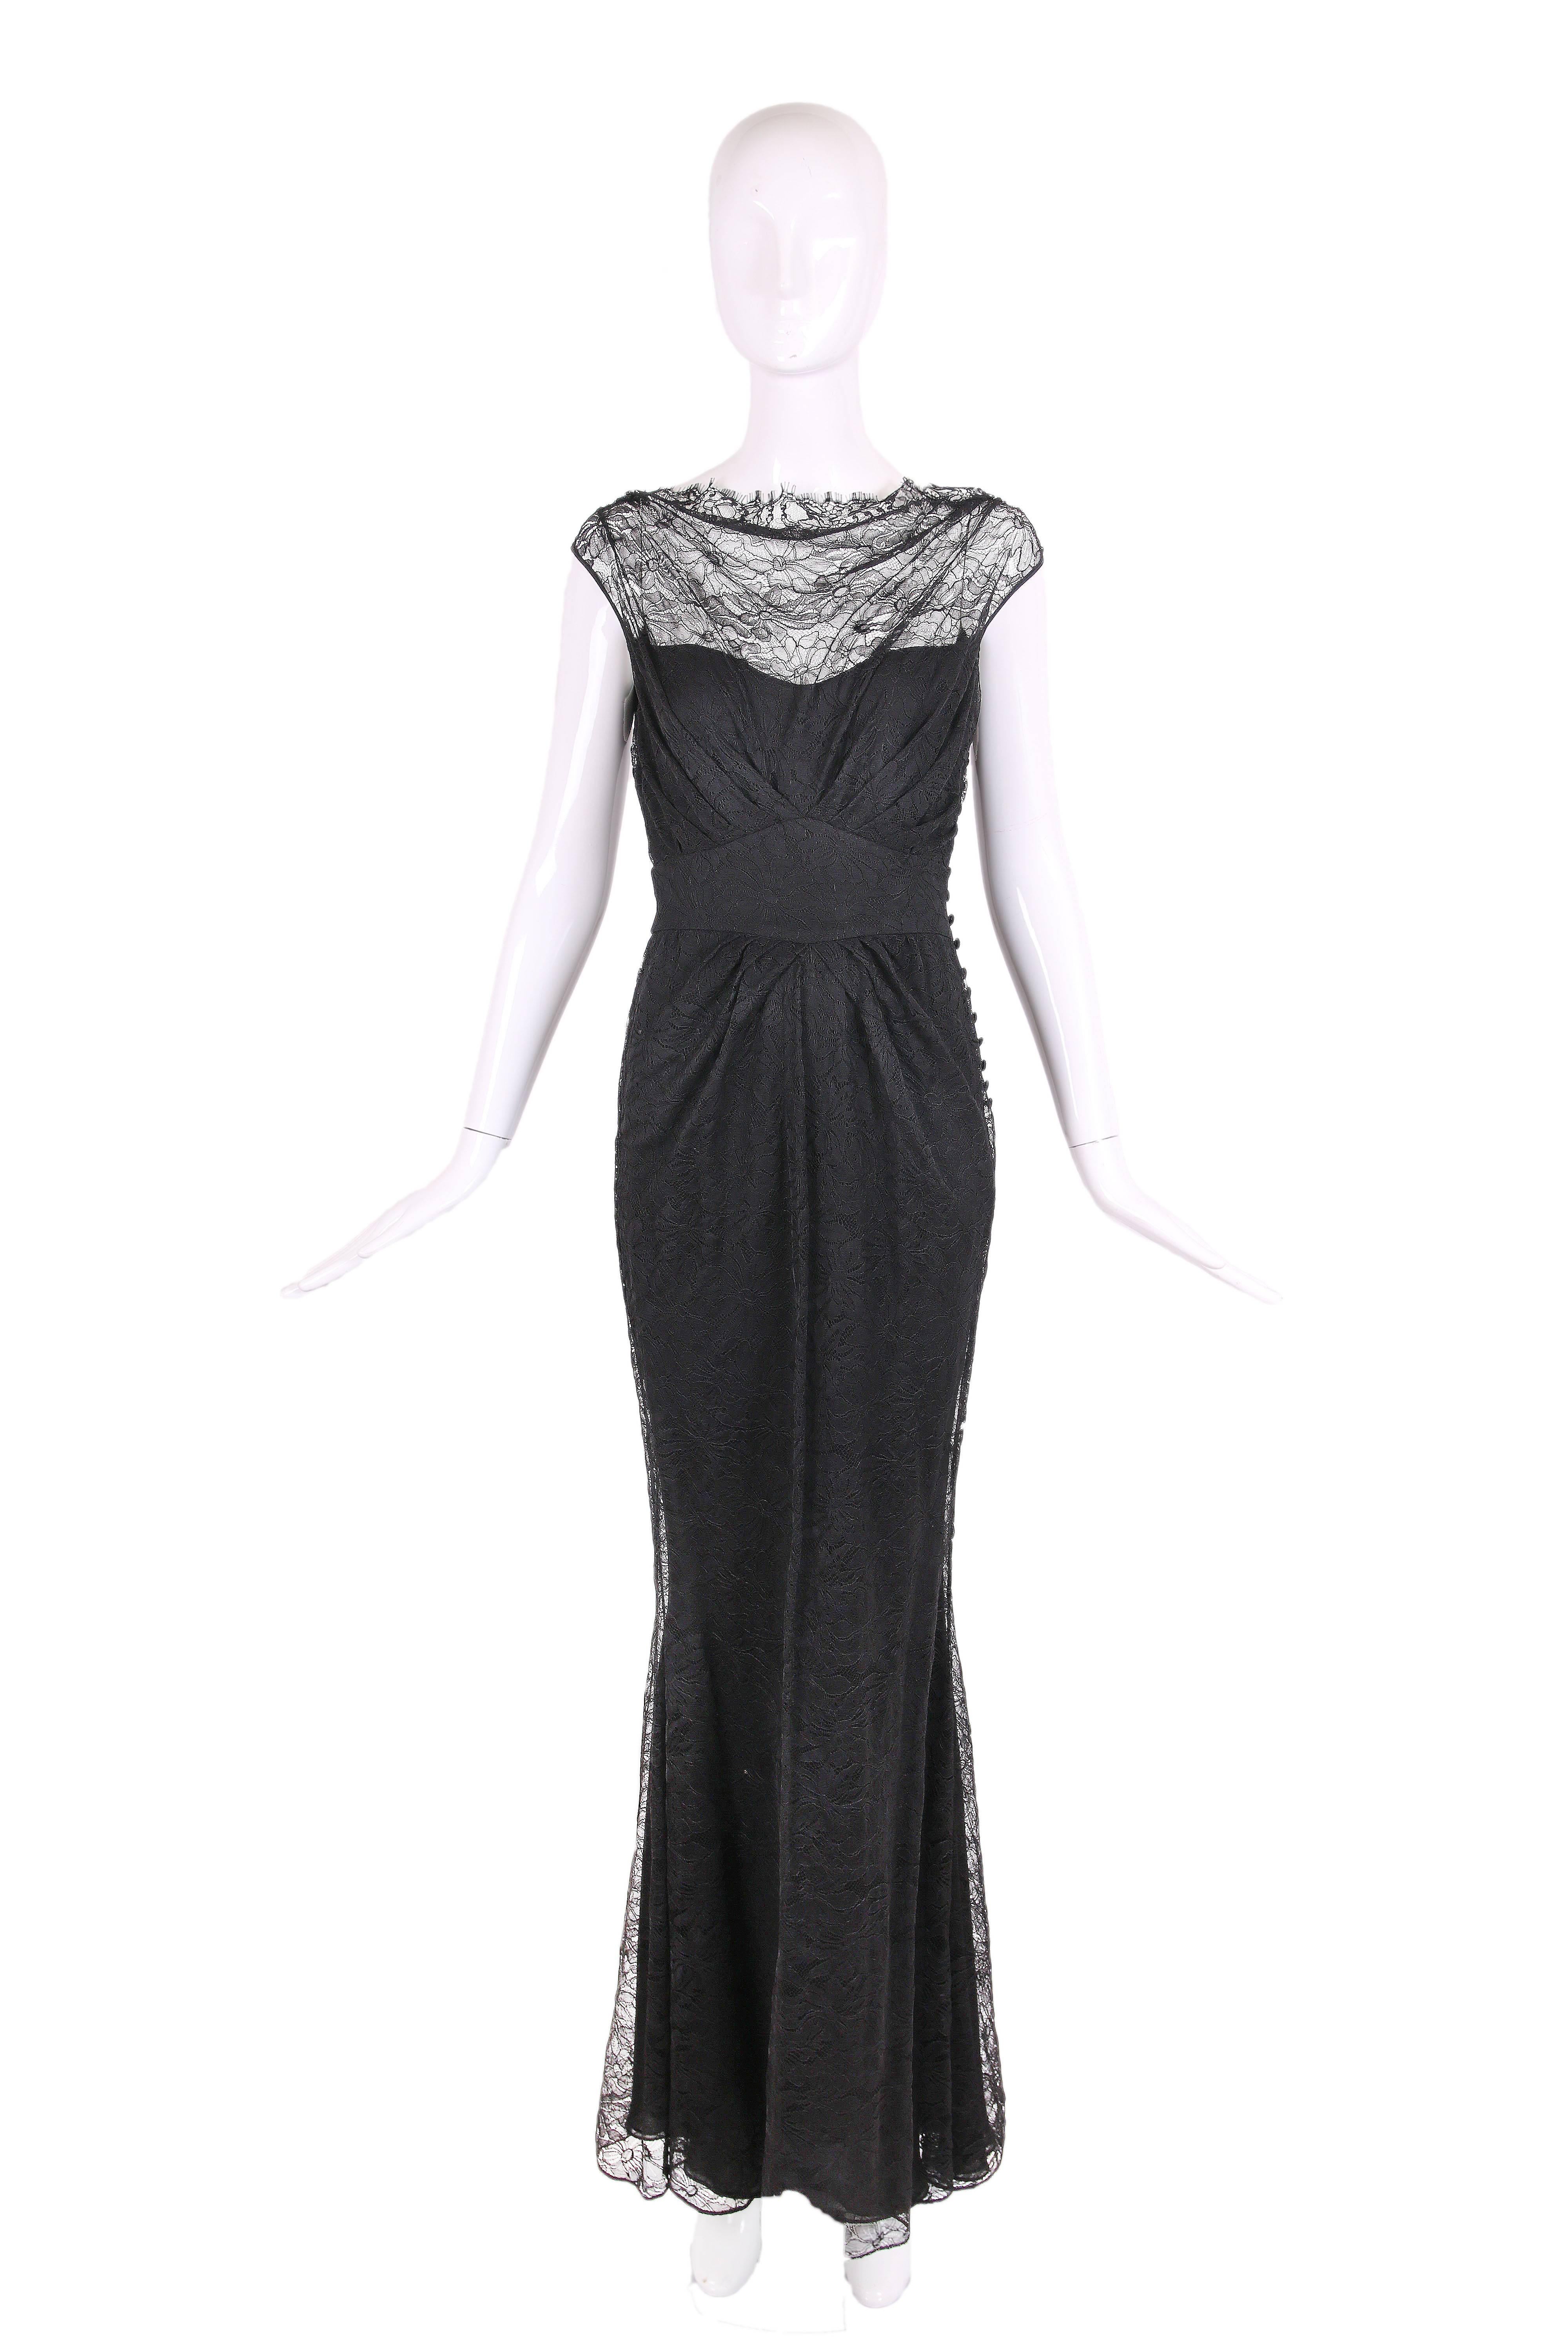 John Galliano black lace gown with slip - with gathers at the front, back and mermaid hem. In excellent condition -size tag 4.